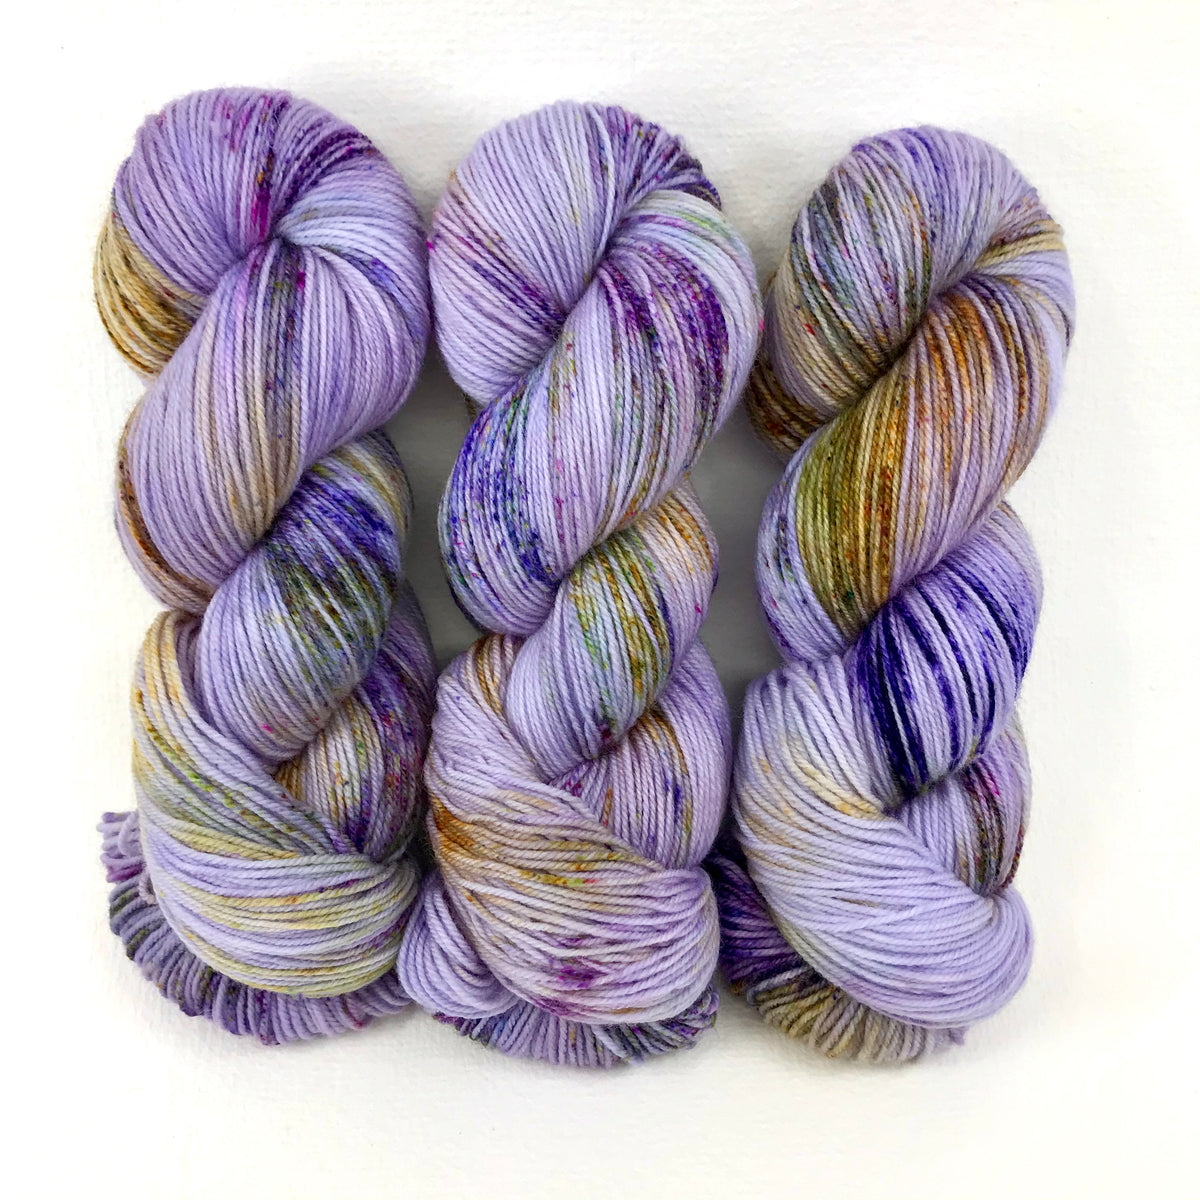 Lavender Fields Forever - Passion 8 Fingering - Dyed Stock